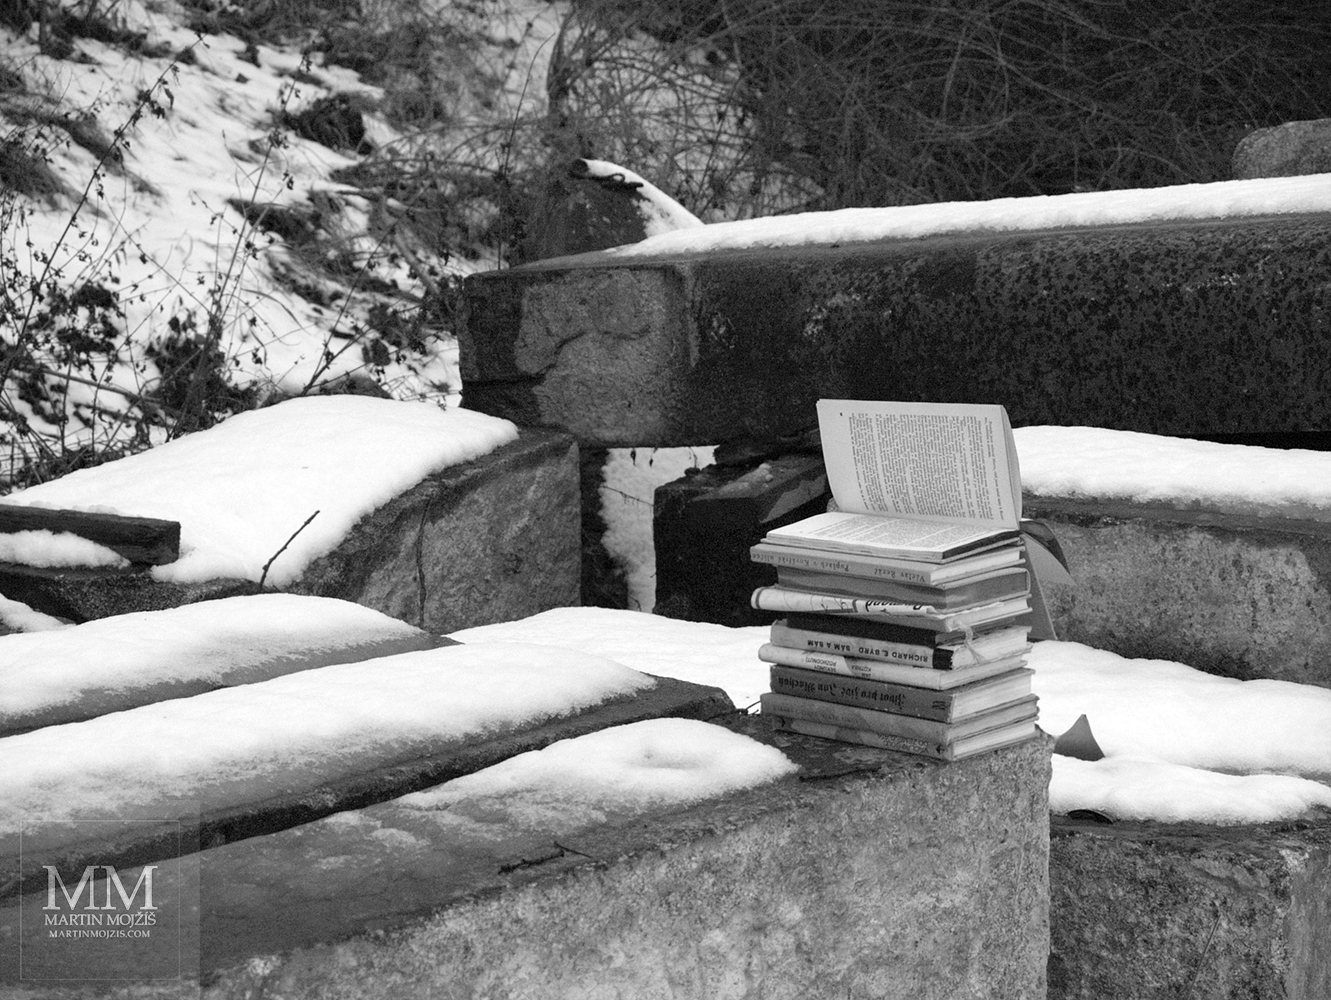 Books leaved outside on a large stone block, sometimes snow. Photograph with the title BOOKS.